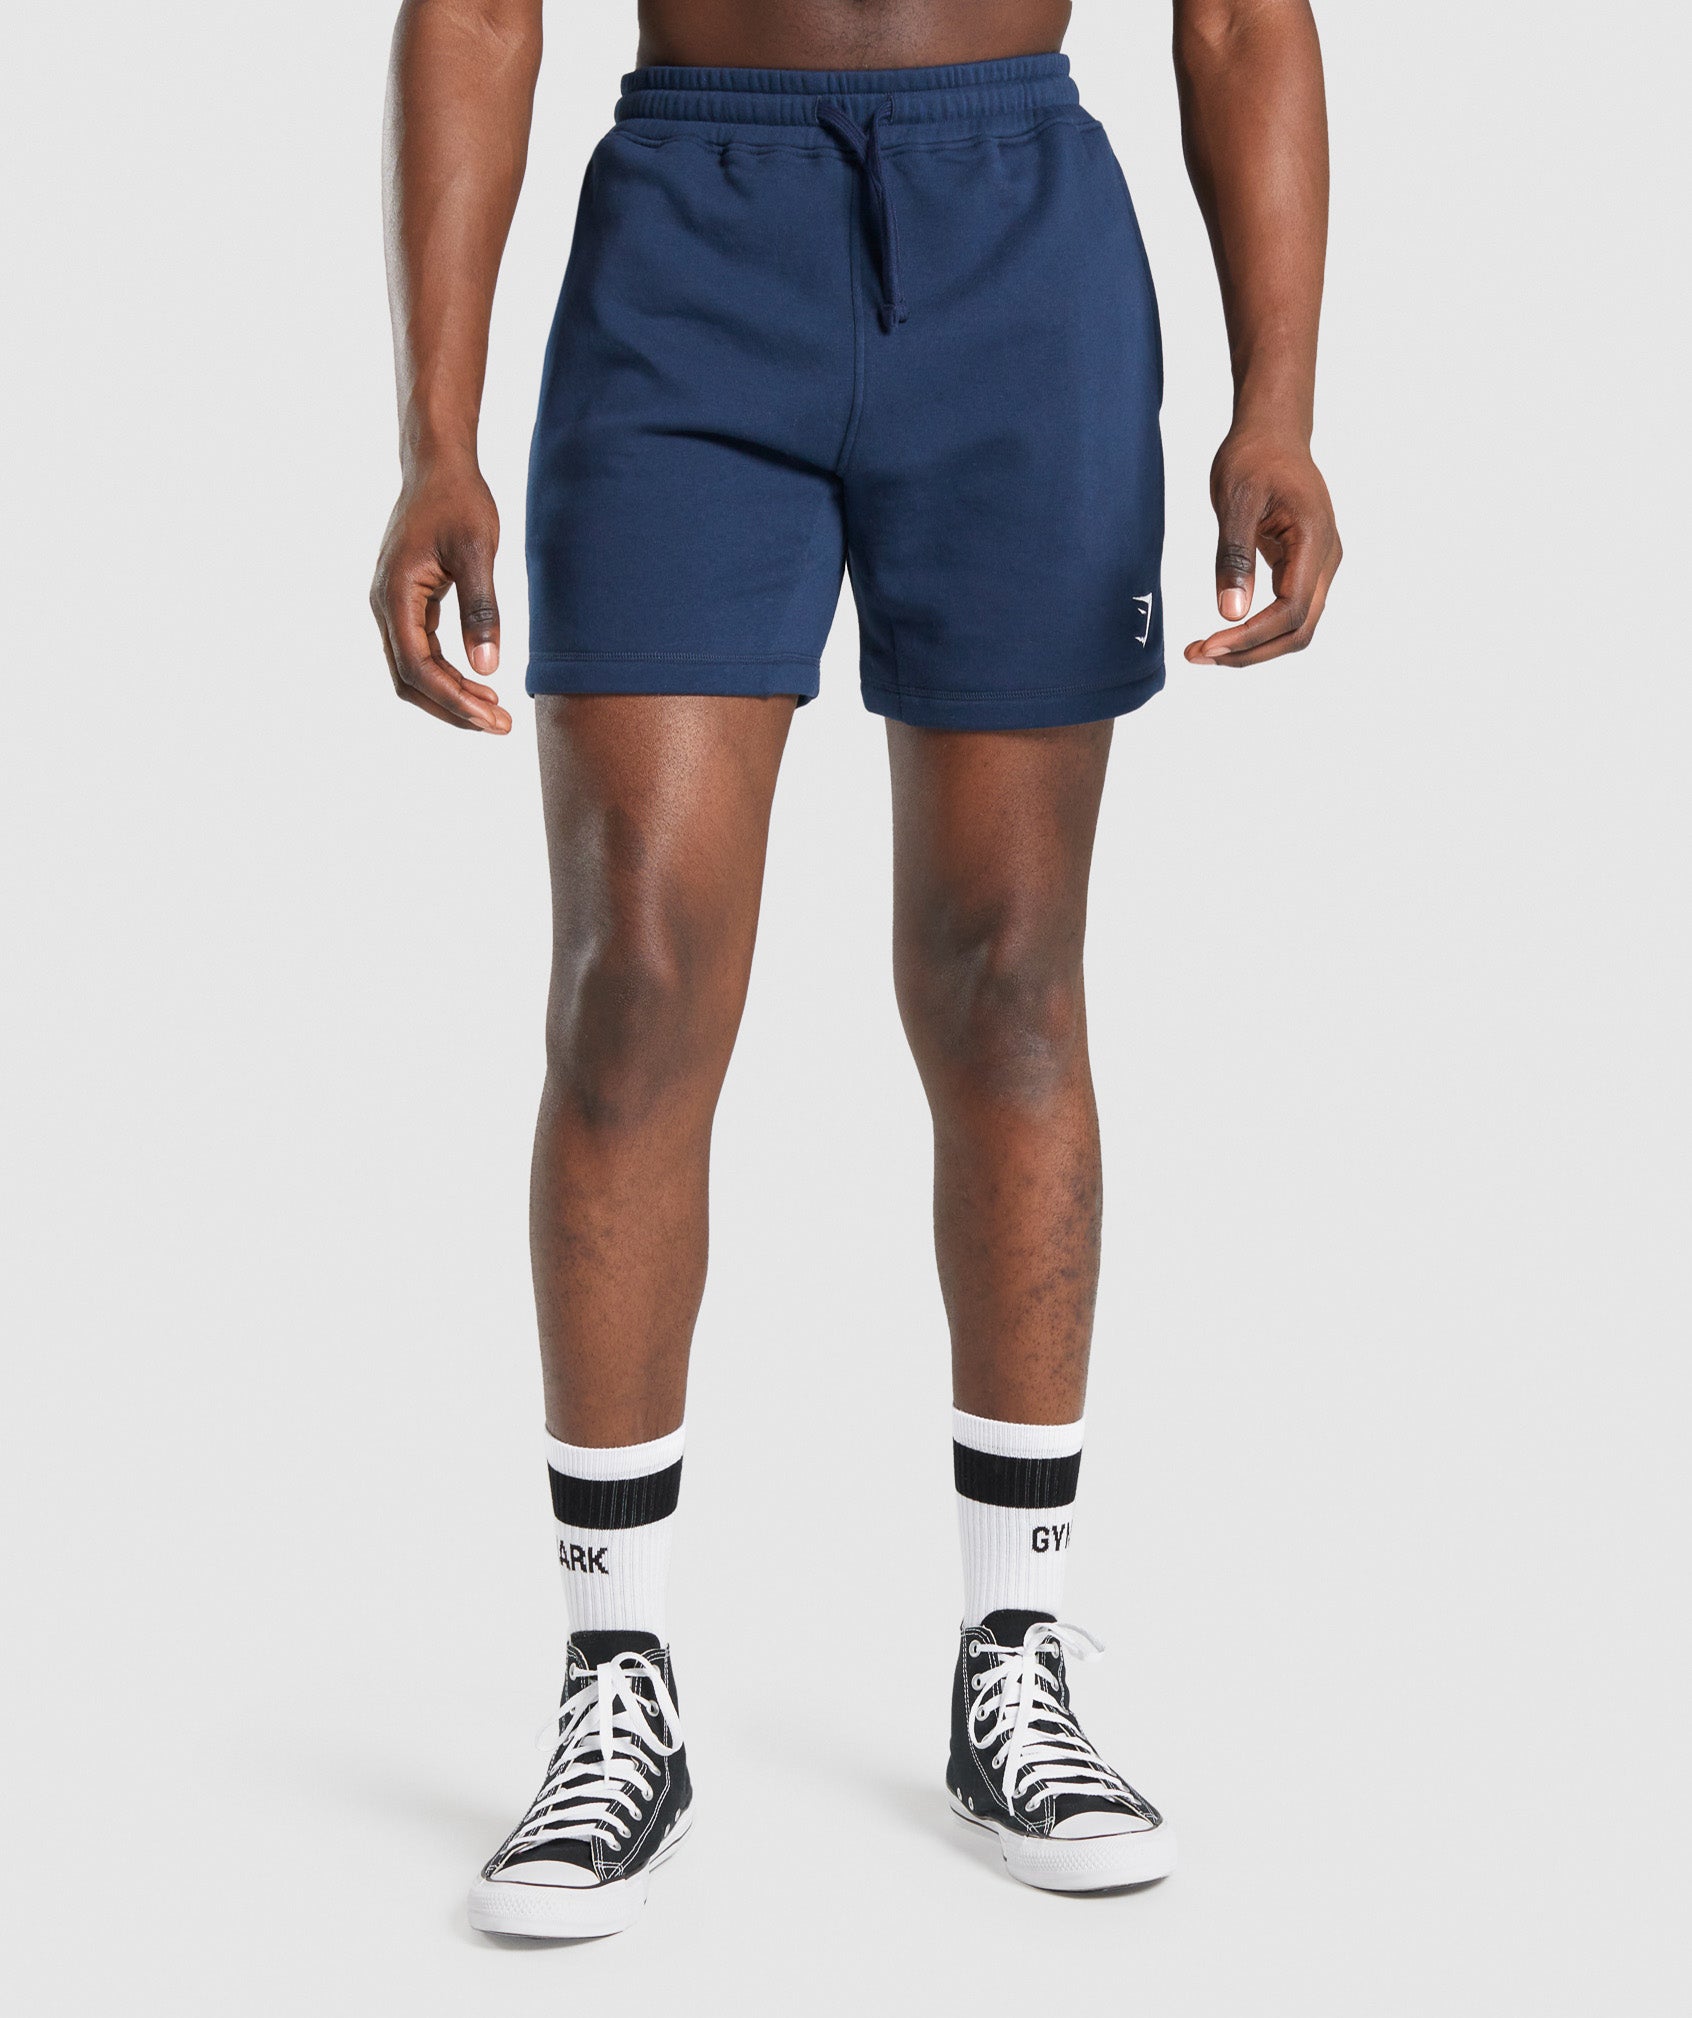 Gymshark Crest 7” inseam shorts. Perfect shorts for us short kings